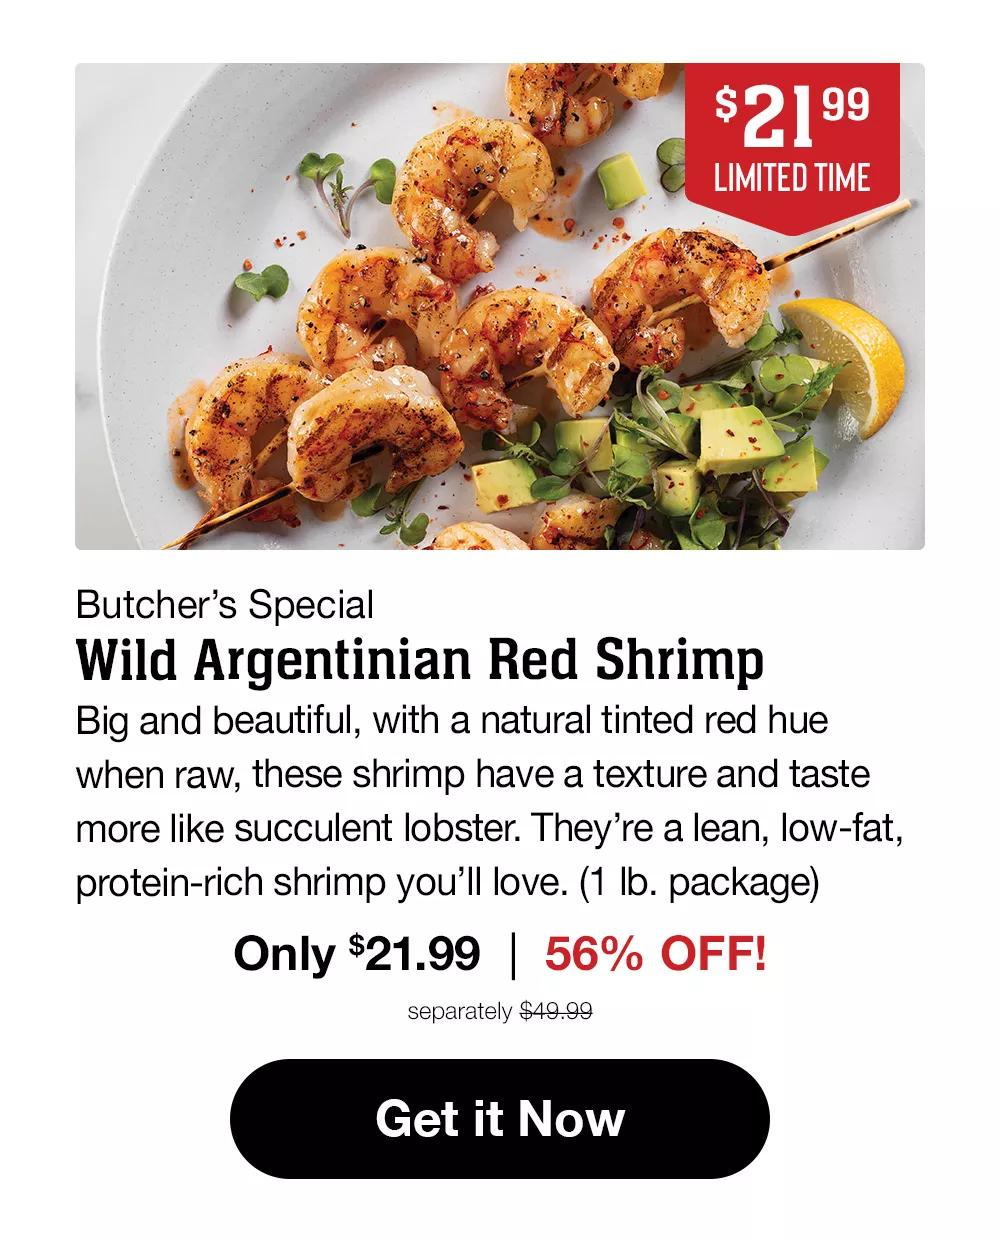 $21.99 LIMITED TIME | Butcher's Special Wild Argentinian Red Shrimp | Big and beautiful, with a natural tinted red hue when raw, these shrimp have a texture and taste more like succulent lobster. They're a lean, low-fat, protein-rich shrimp you'll love. (1 lb. package) Only $21.99 | 56% OFF! separately $49.99 || Get it Now